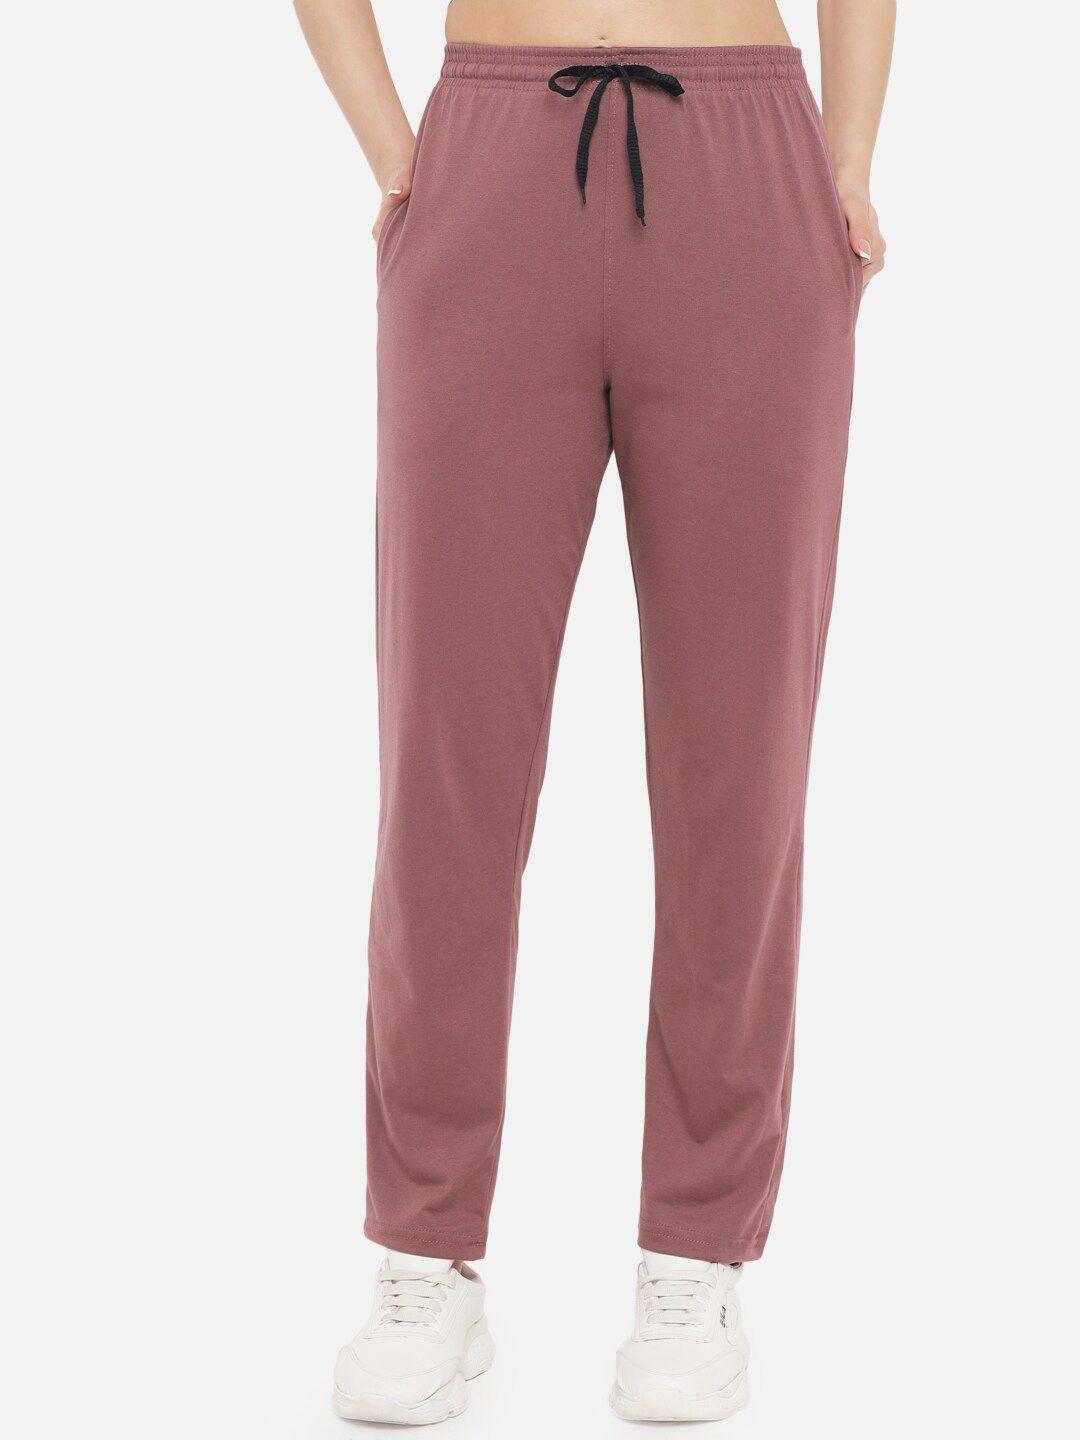 fflirtygo women lavender solid relaxed fit cotton track pants